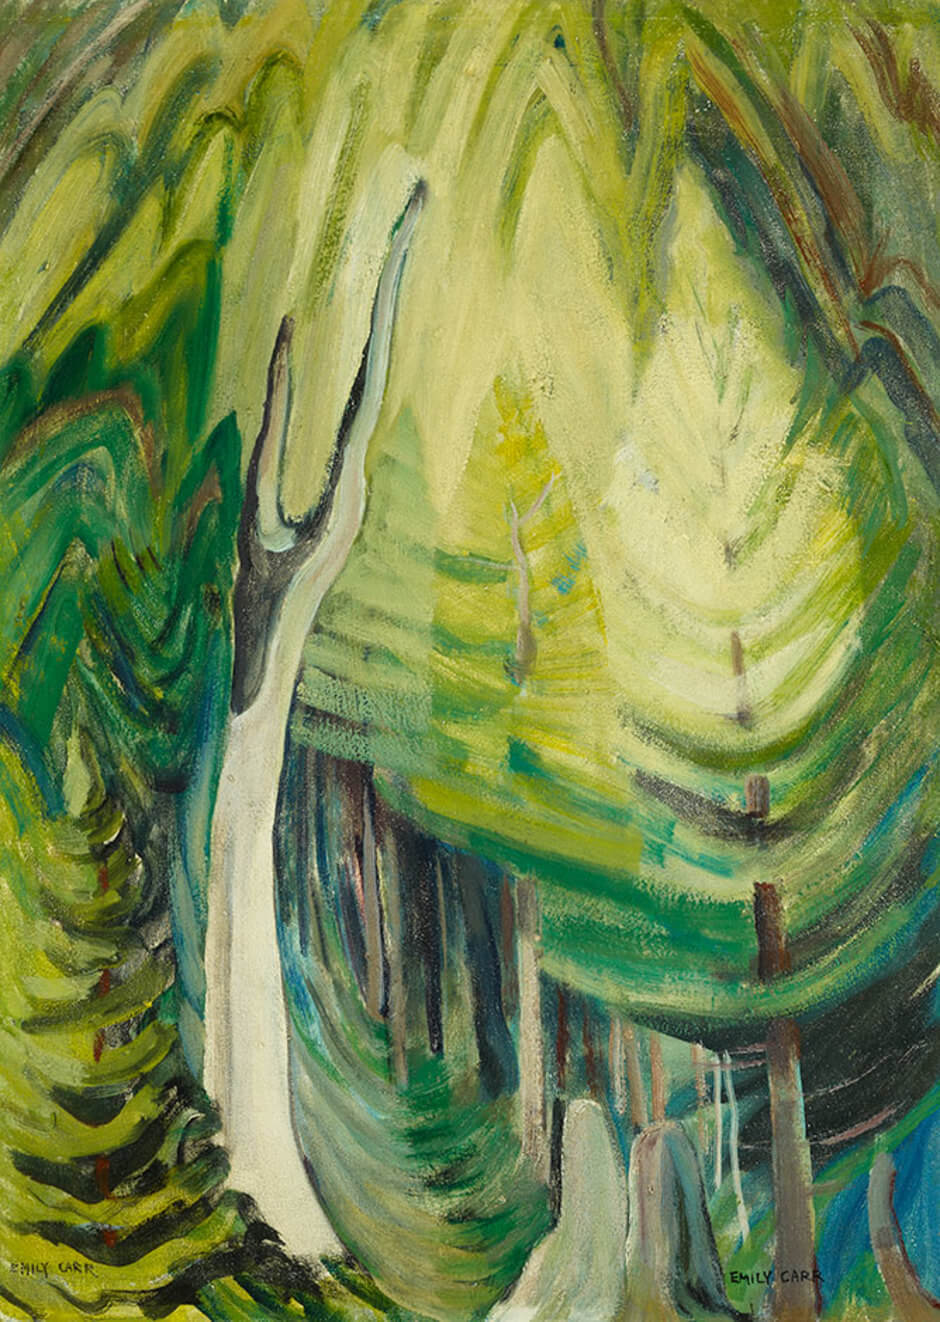 Art Canada Institute, Jock Macdonald, Young Pines in Light, by Emily Carr, c. 1935